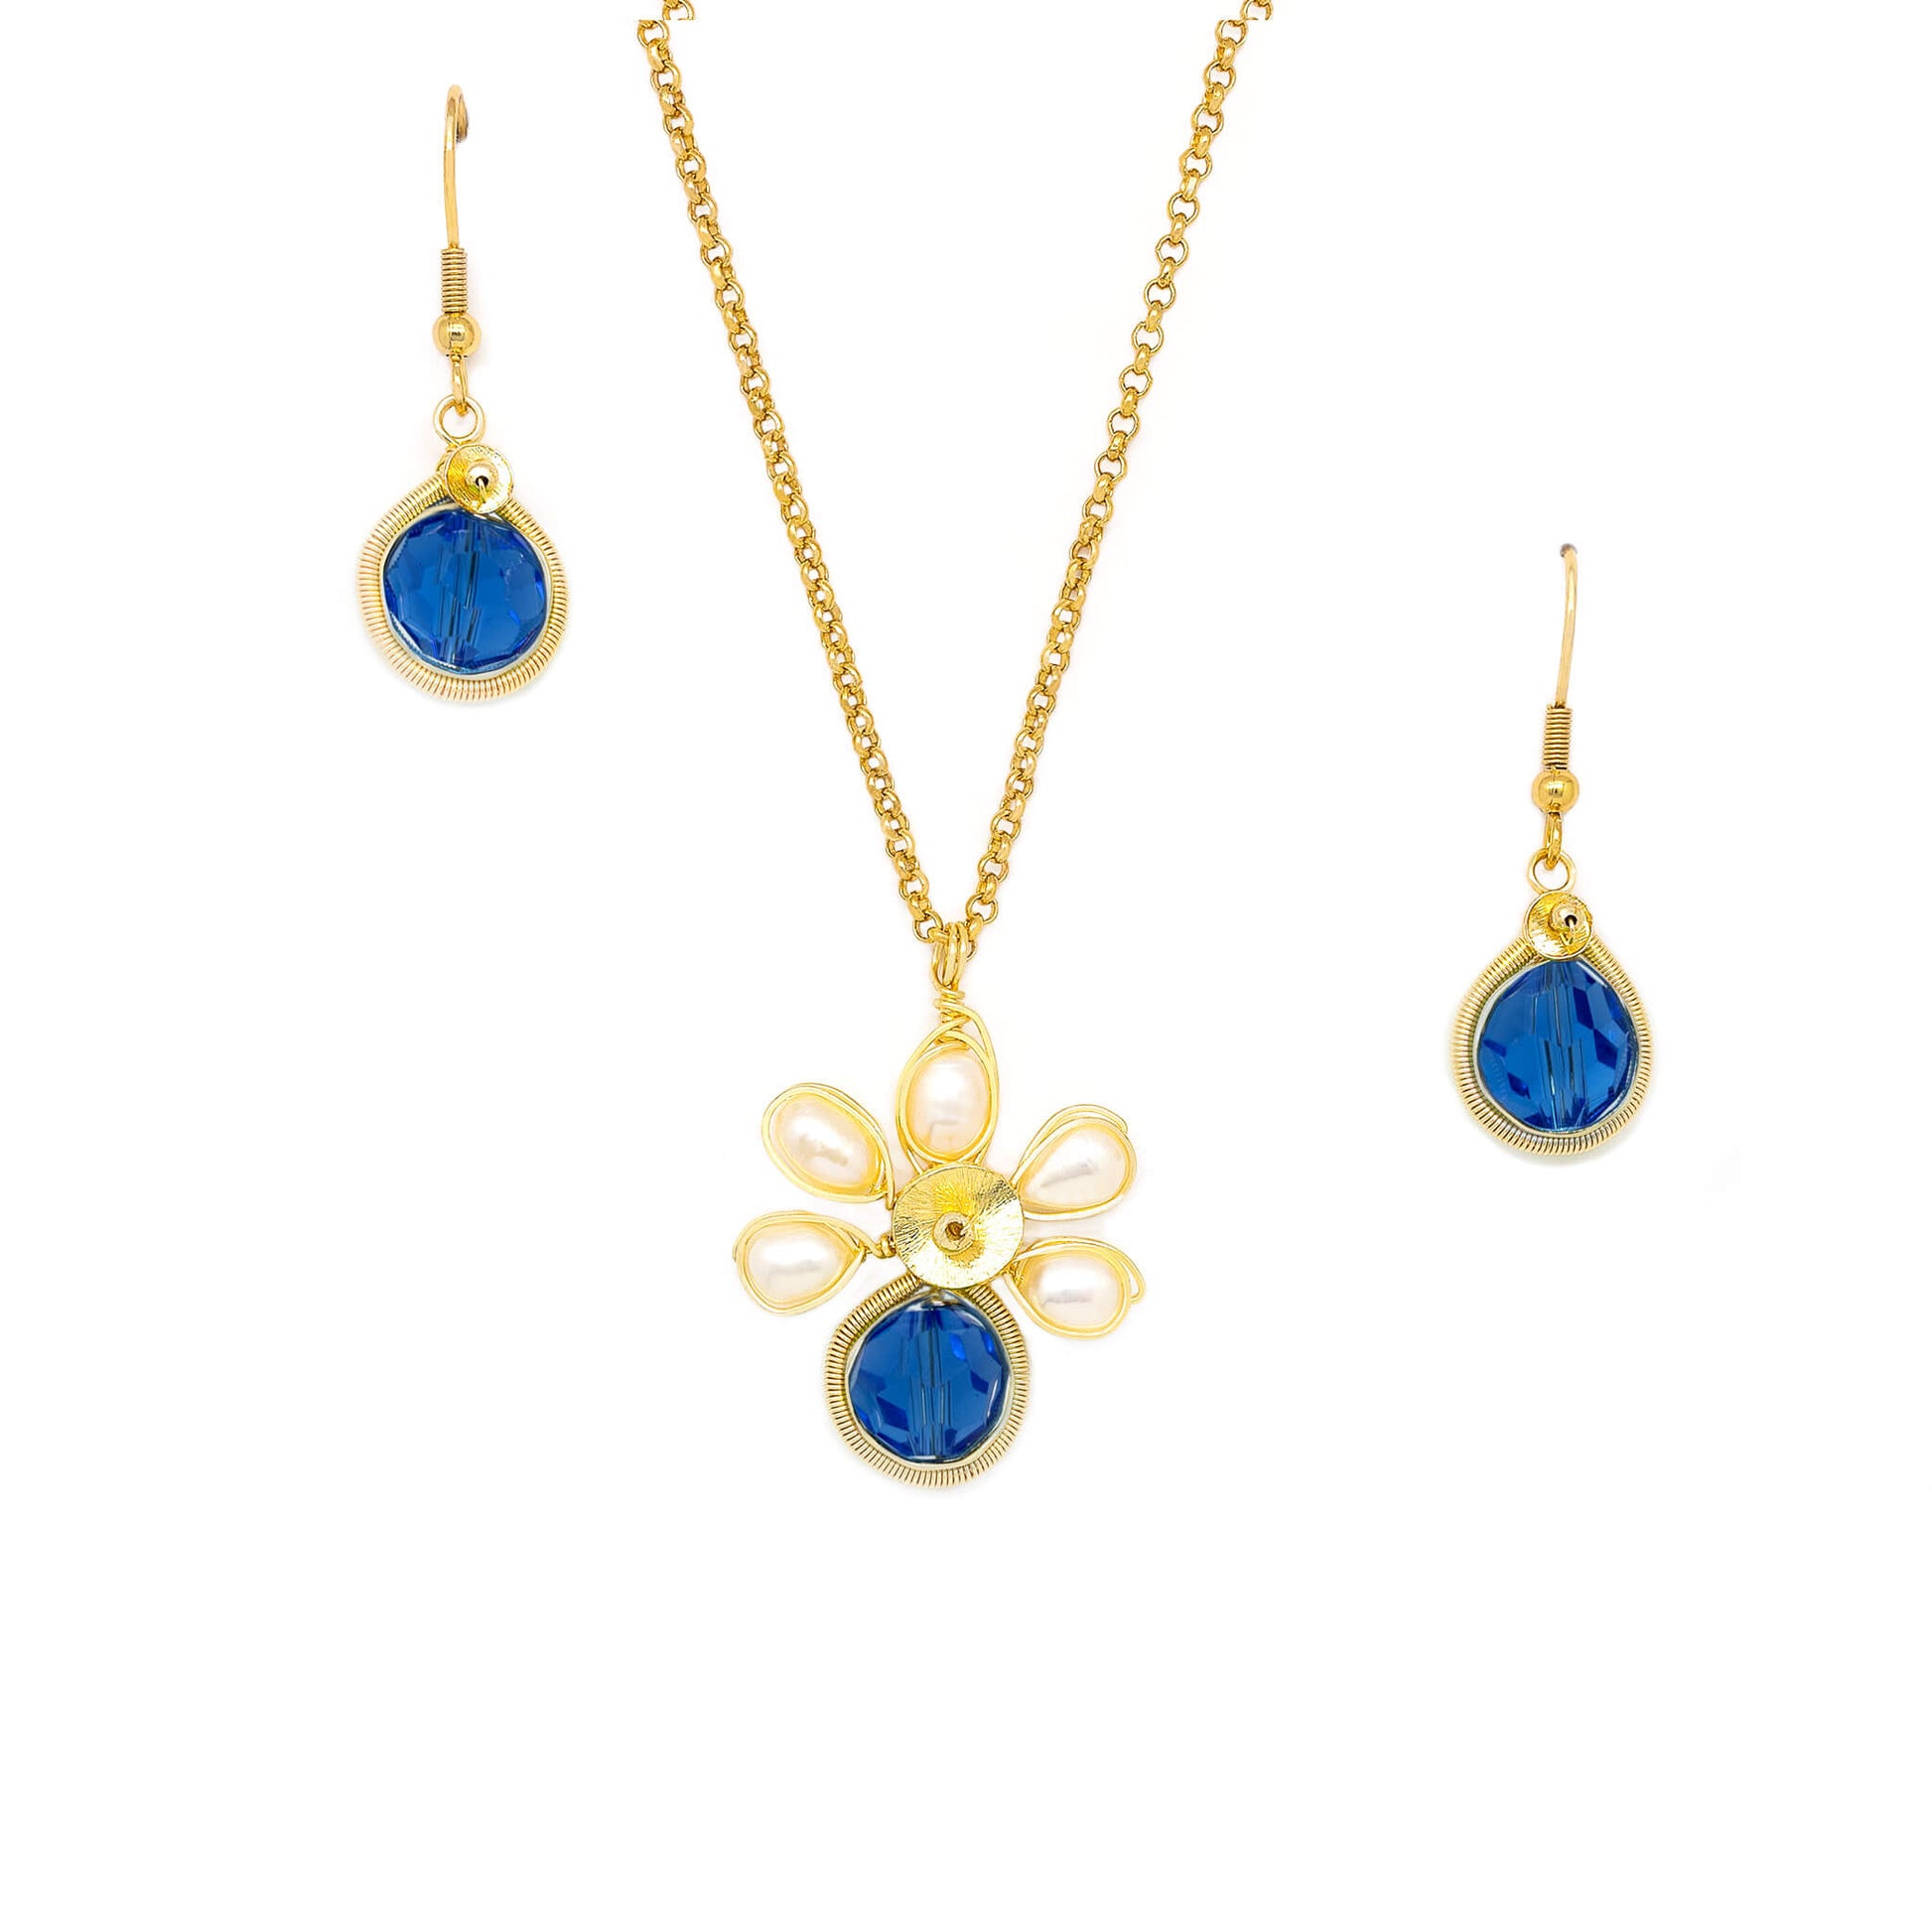 September Birthstone Crystal Necklace.-Earrings Set. Dark Sapphire Blue, Fresh Water Pearls  and Gold Set. 22K Gold Plated Chain. 